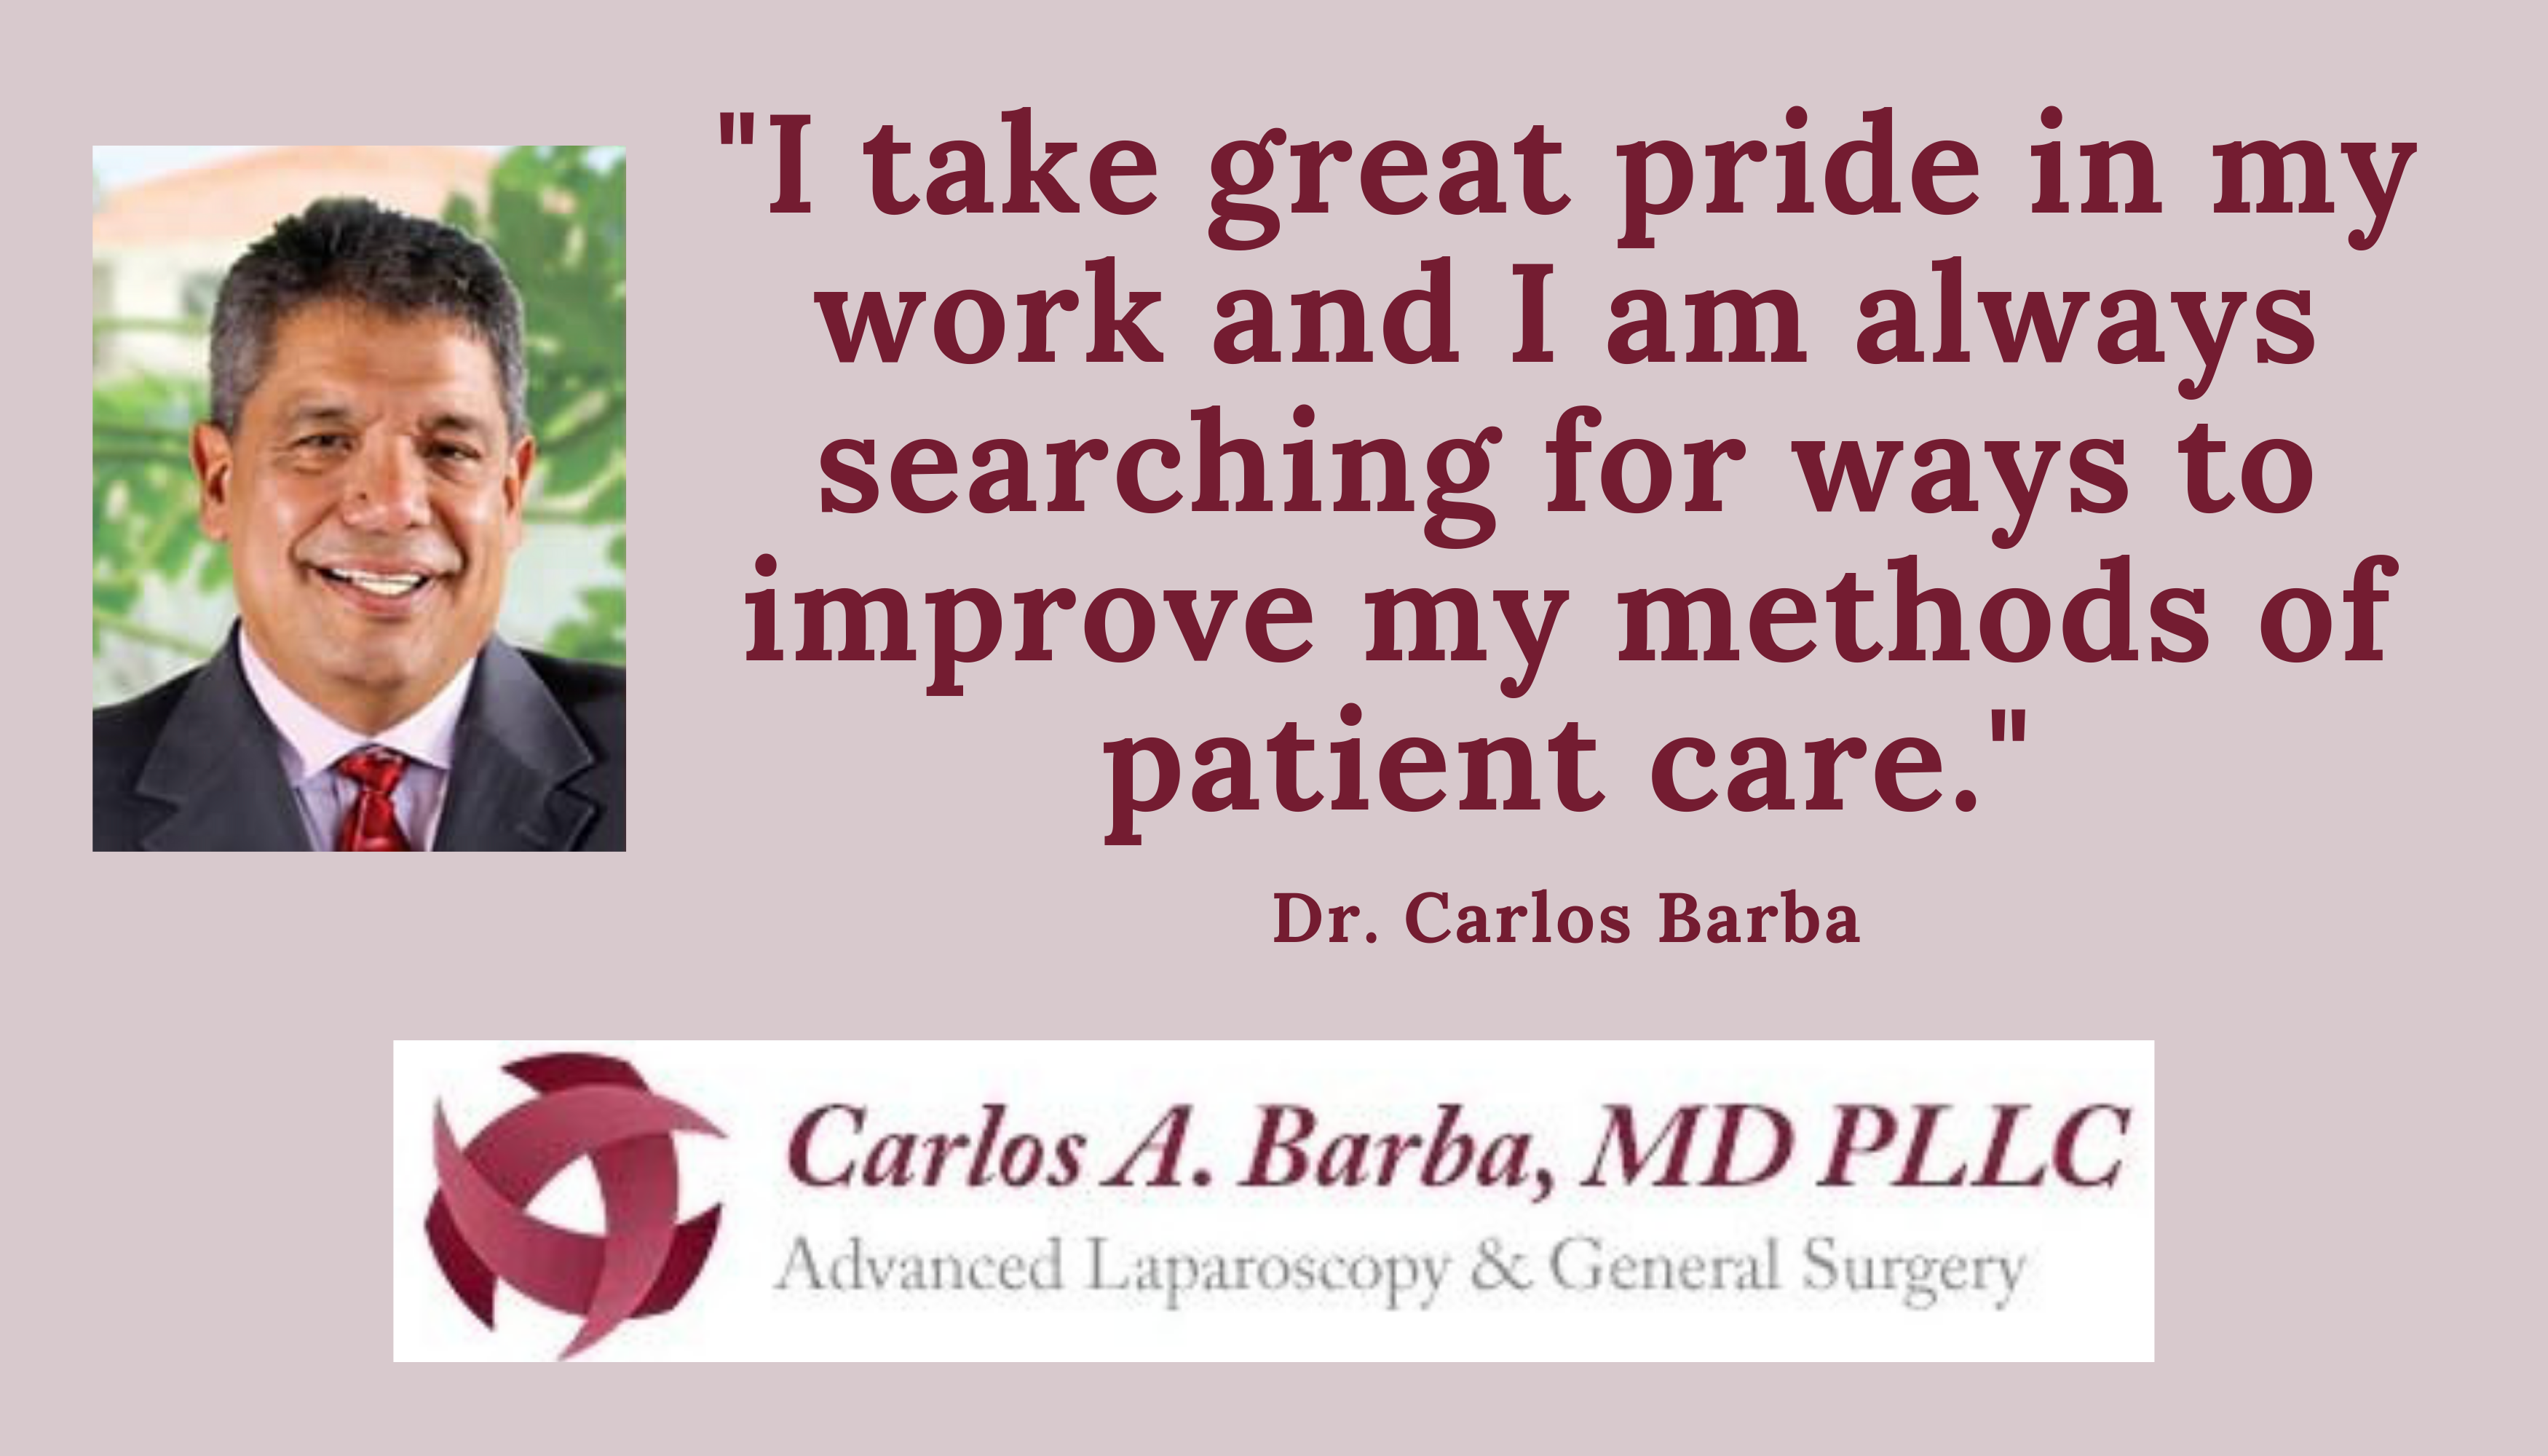 Dr. Carlos A. Barba, MD, PLLC, Thursday, May 27, 2021, Press release picture